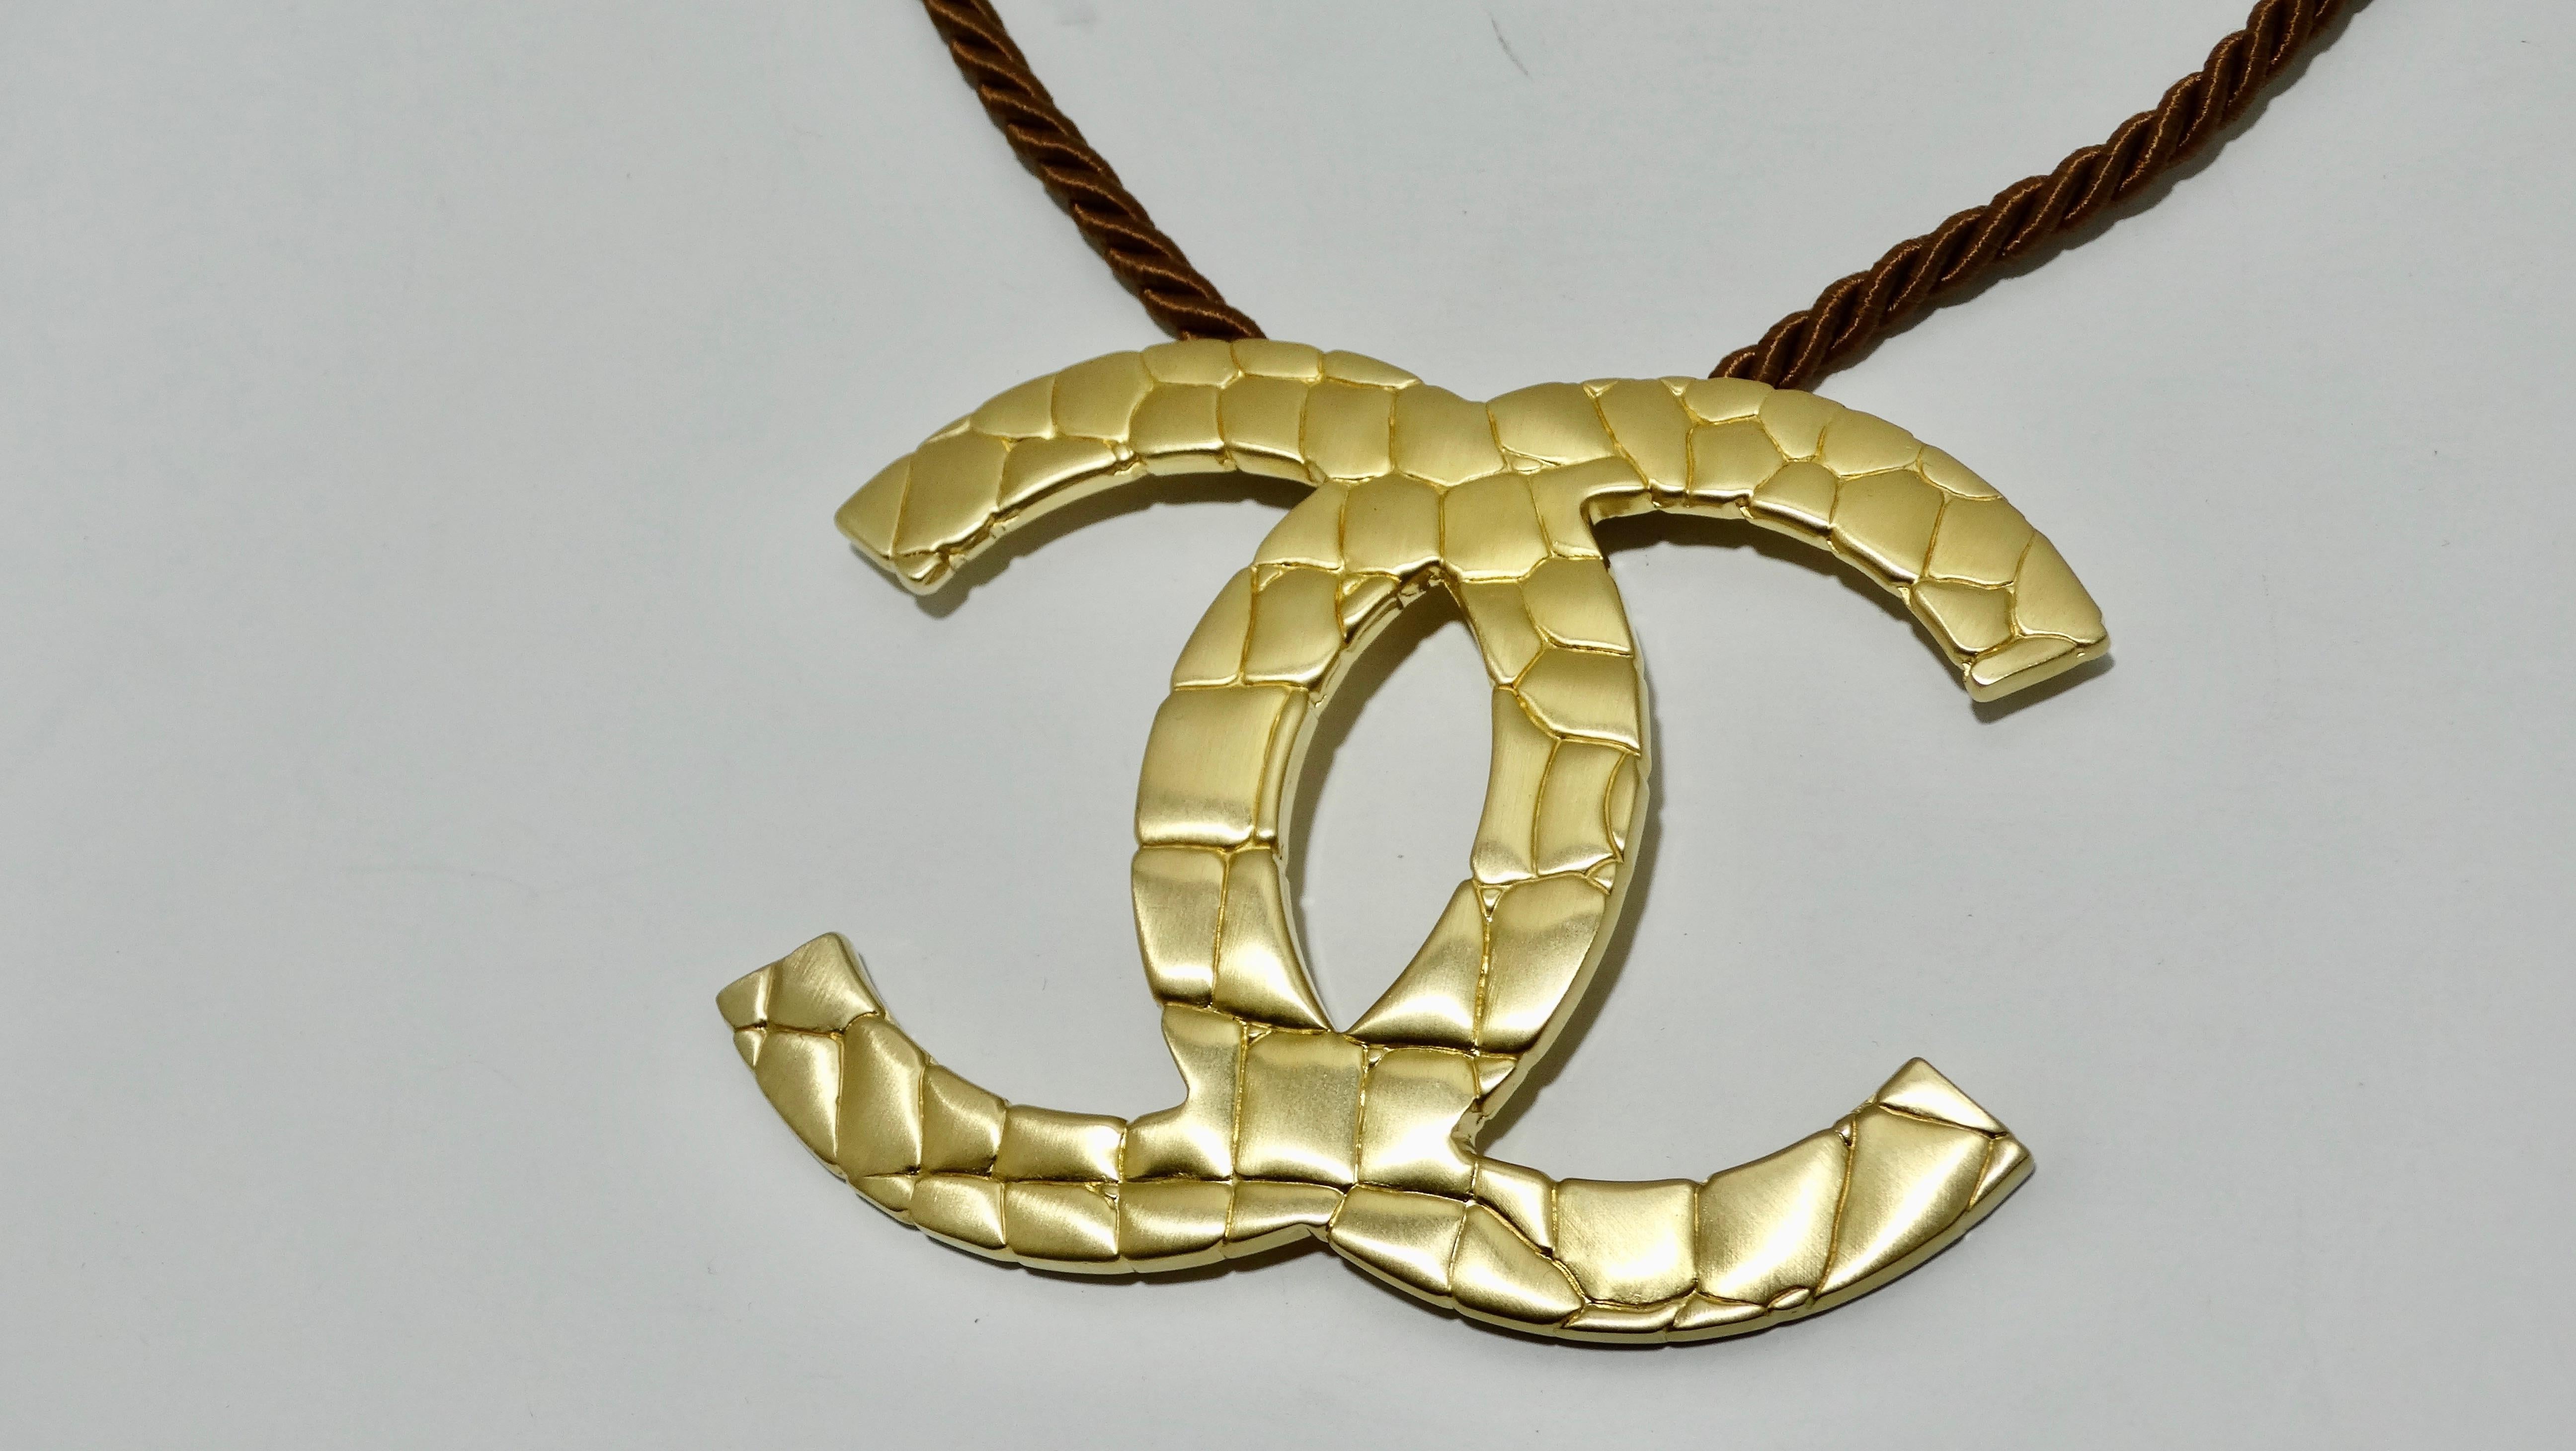 Its time to flaunt what you got with this fabulous Chanel Gold plated Oversized CC logo with a crocodile print pendant choker necklace from Chanel featuring a black torsade cotton and silk rope chain, a hook fastening and a large shiny silver plated